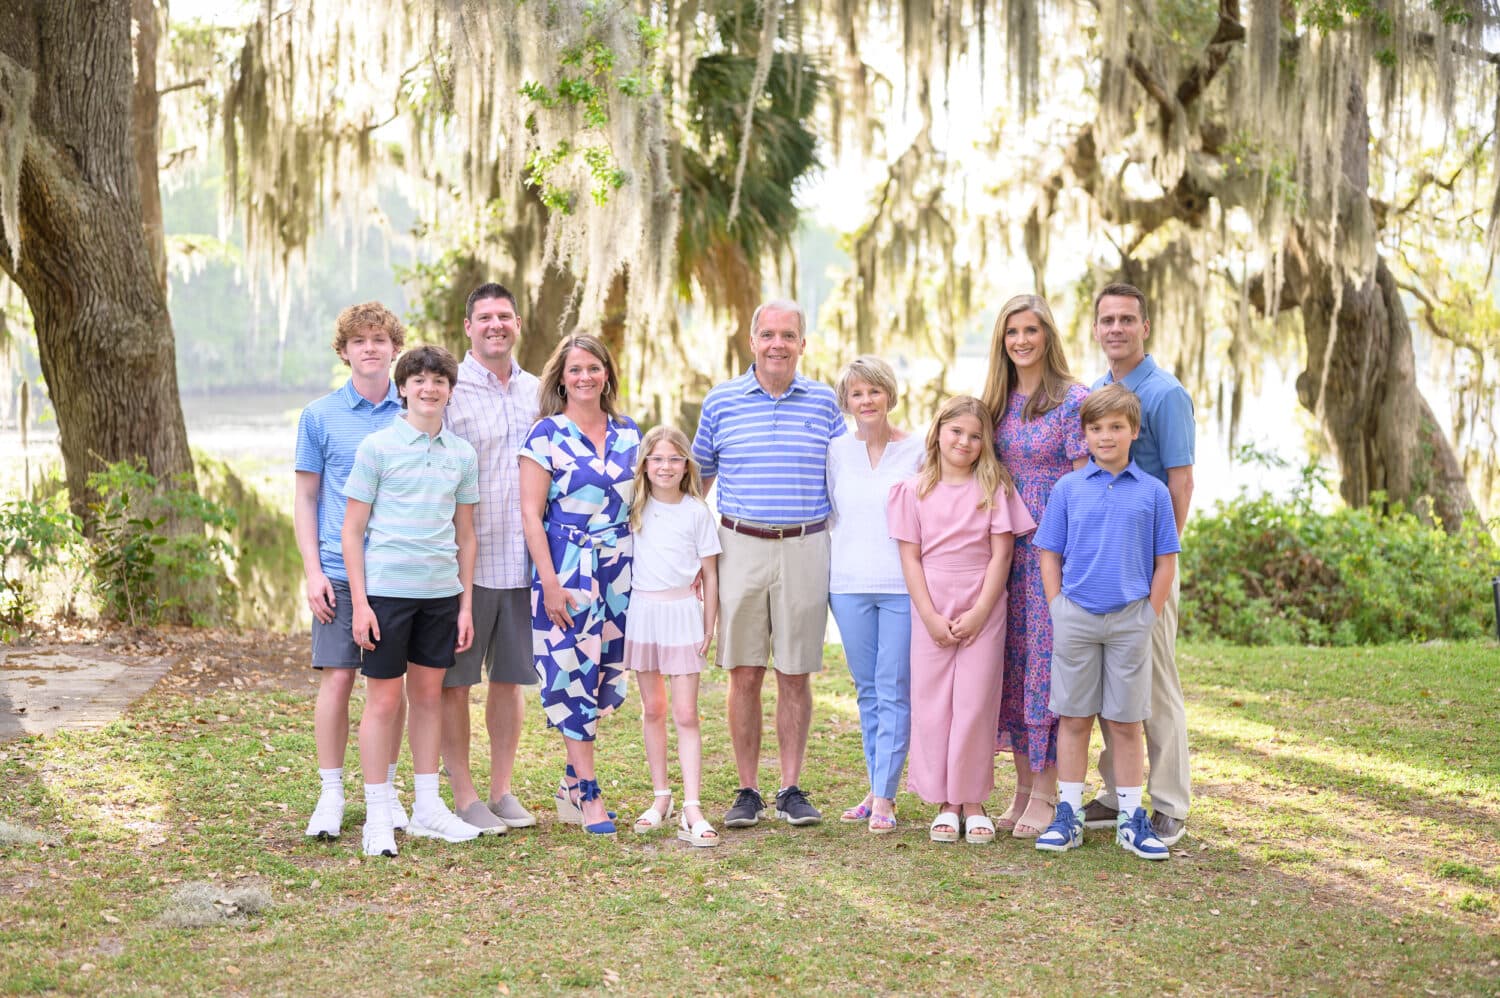 Family portrait in front of the oaks at sunset - Wachesaw Plantation